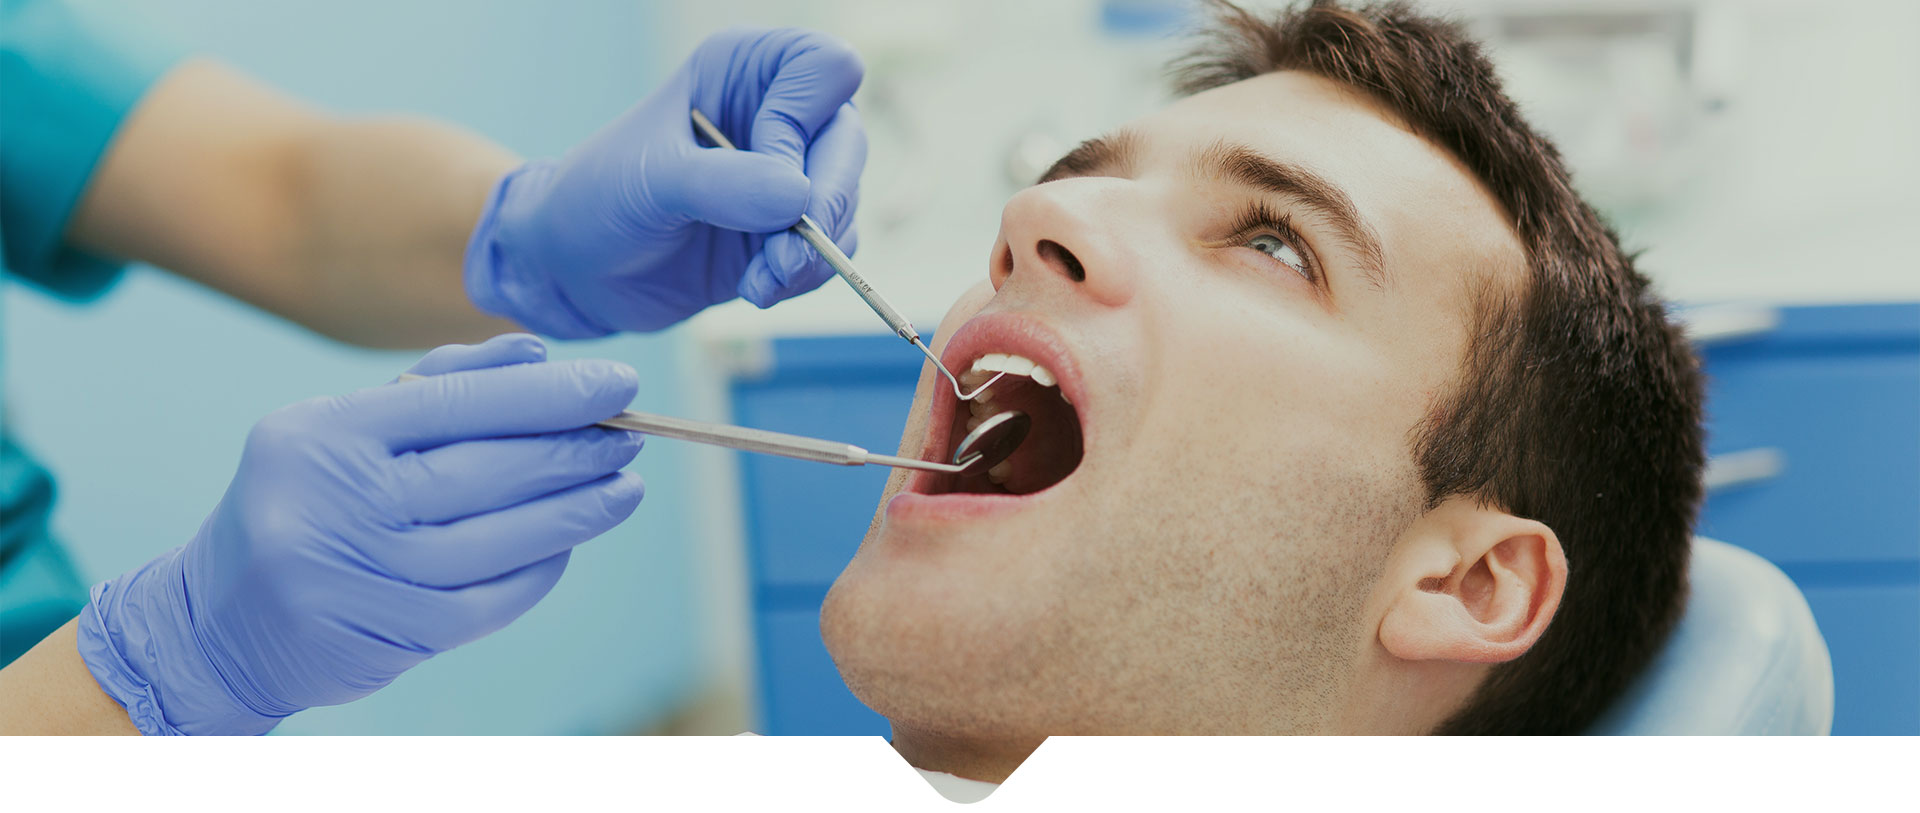 A Male patient having his teeth examined at dentist's